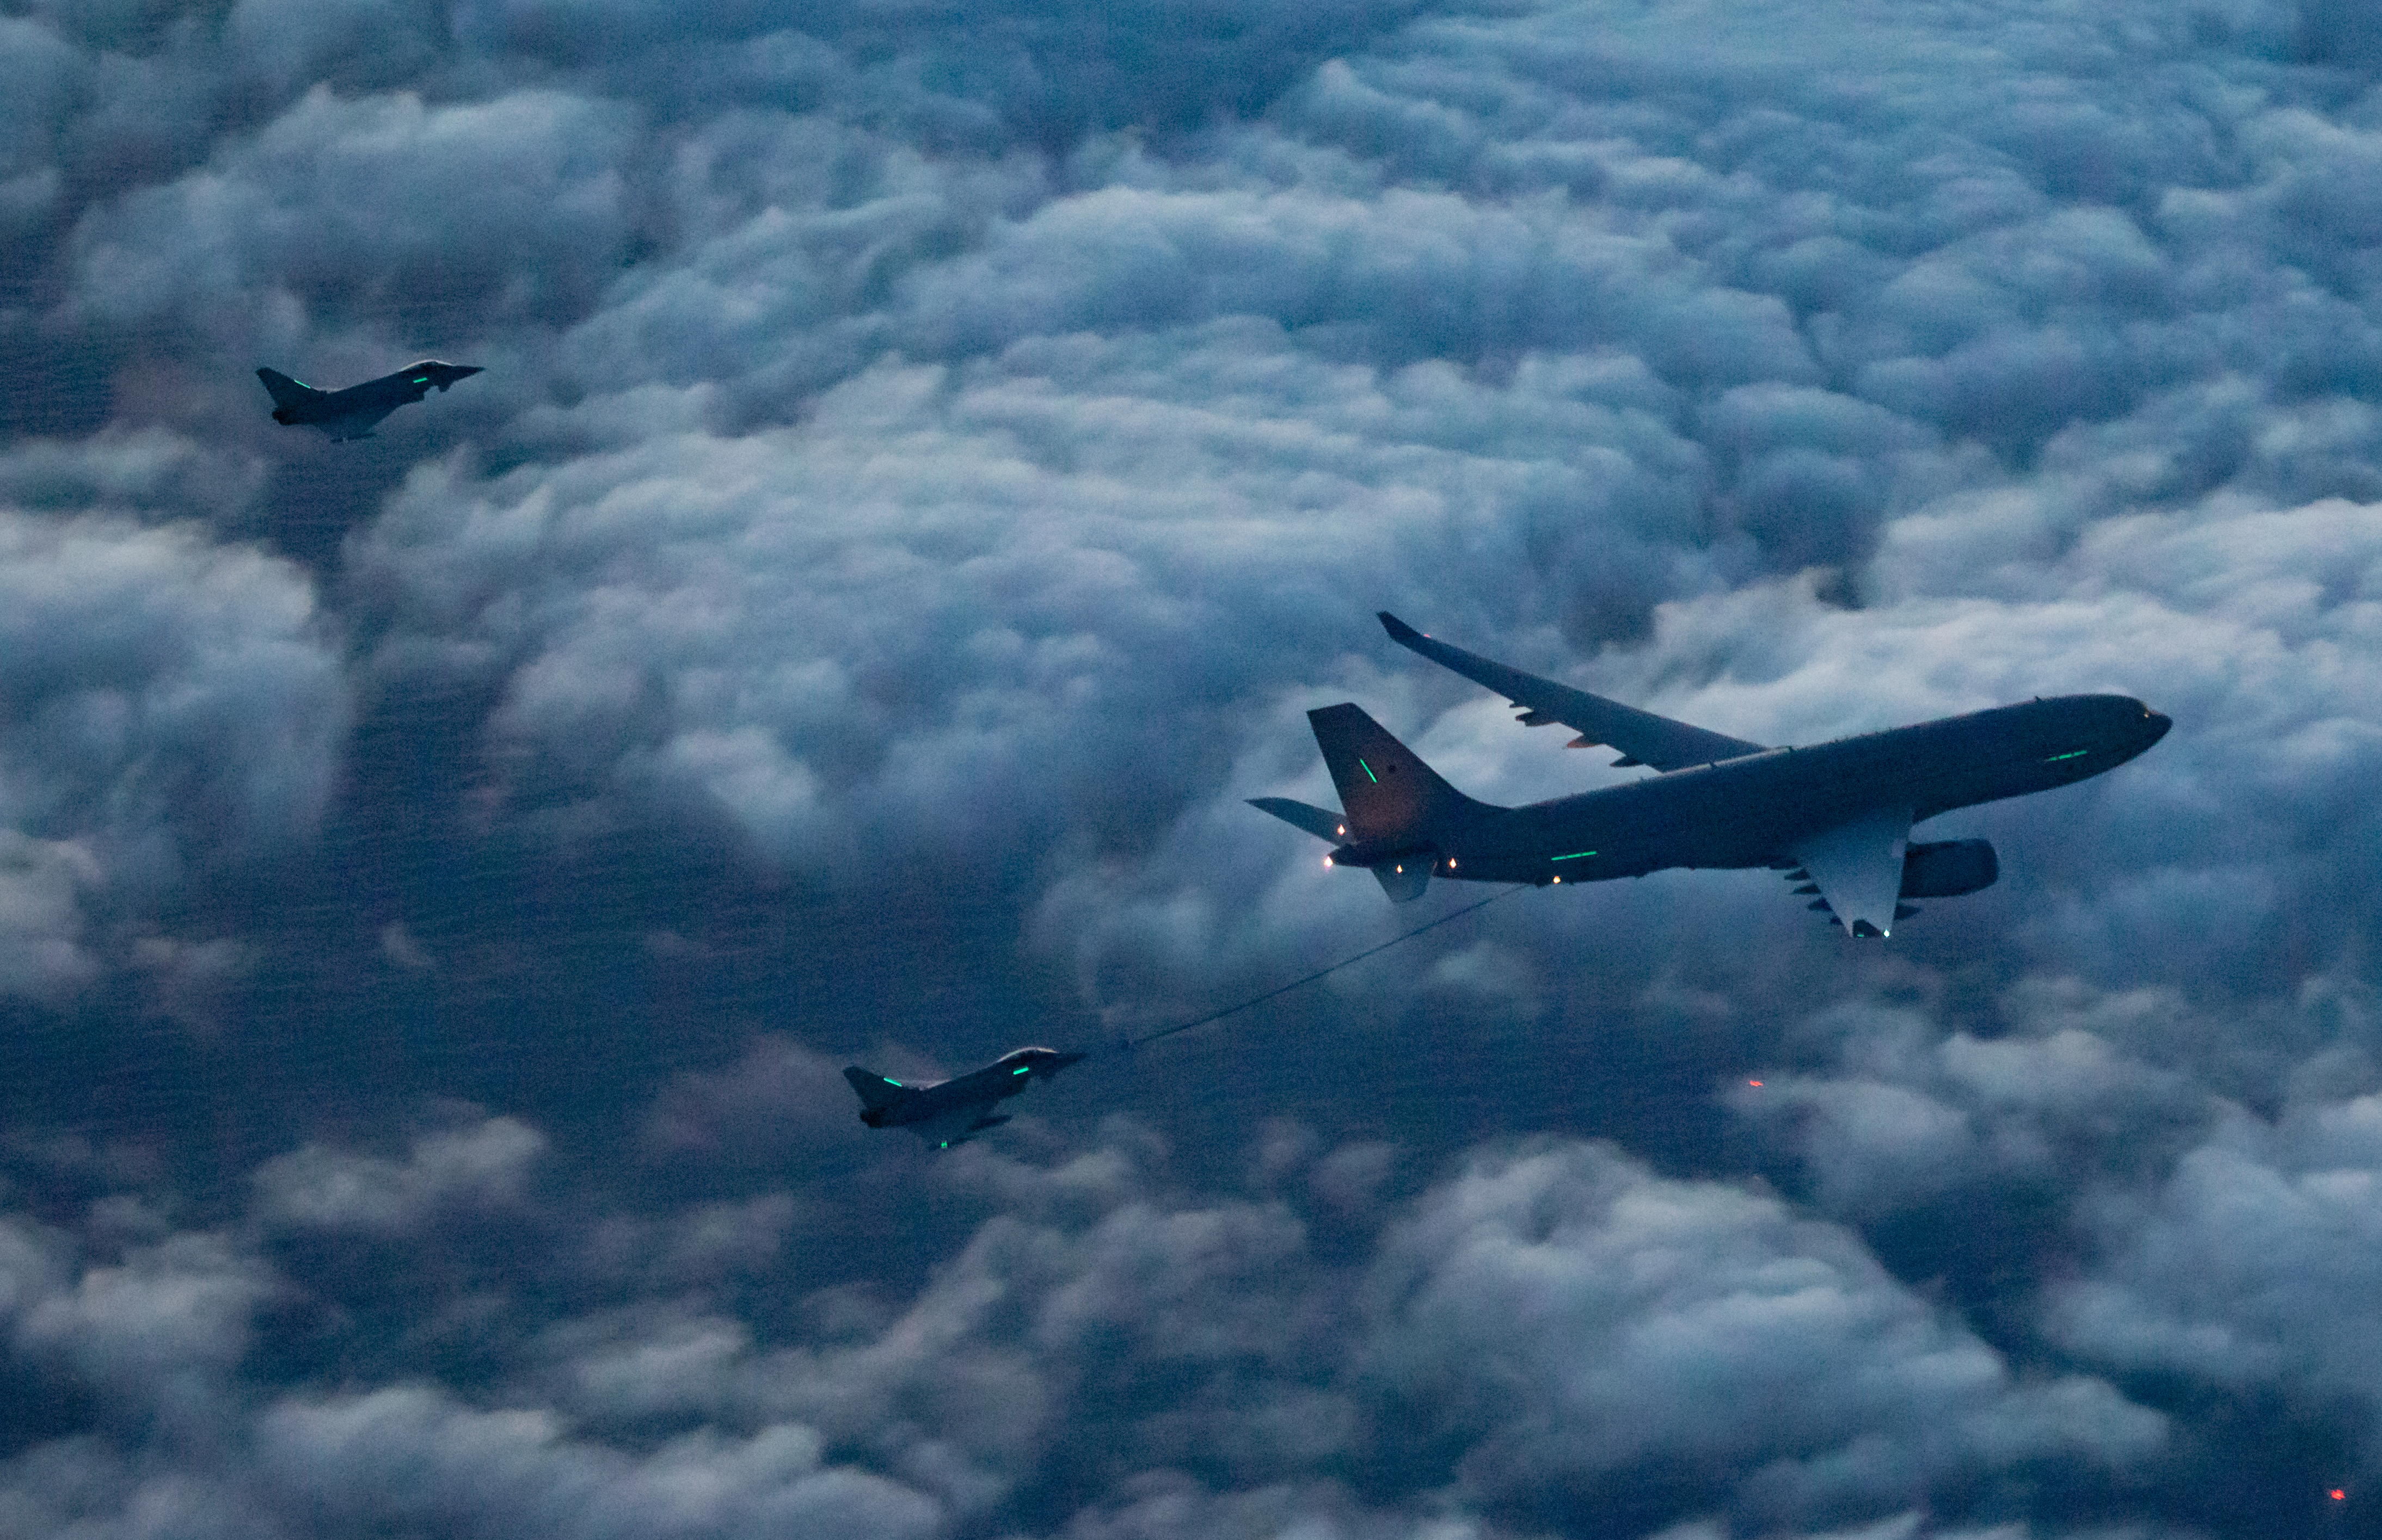 Image shows Typhoon and Voyager aircraft during air-to-air refuelling.